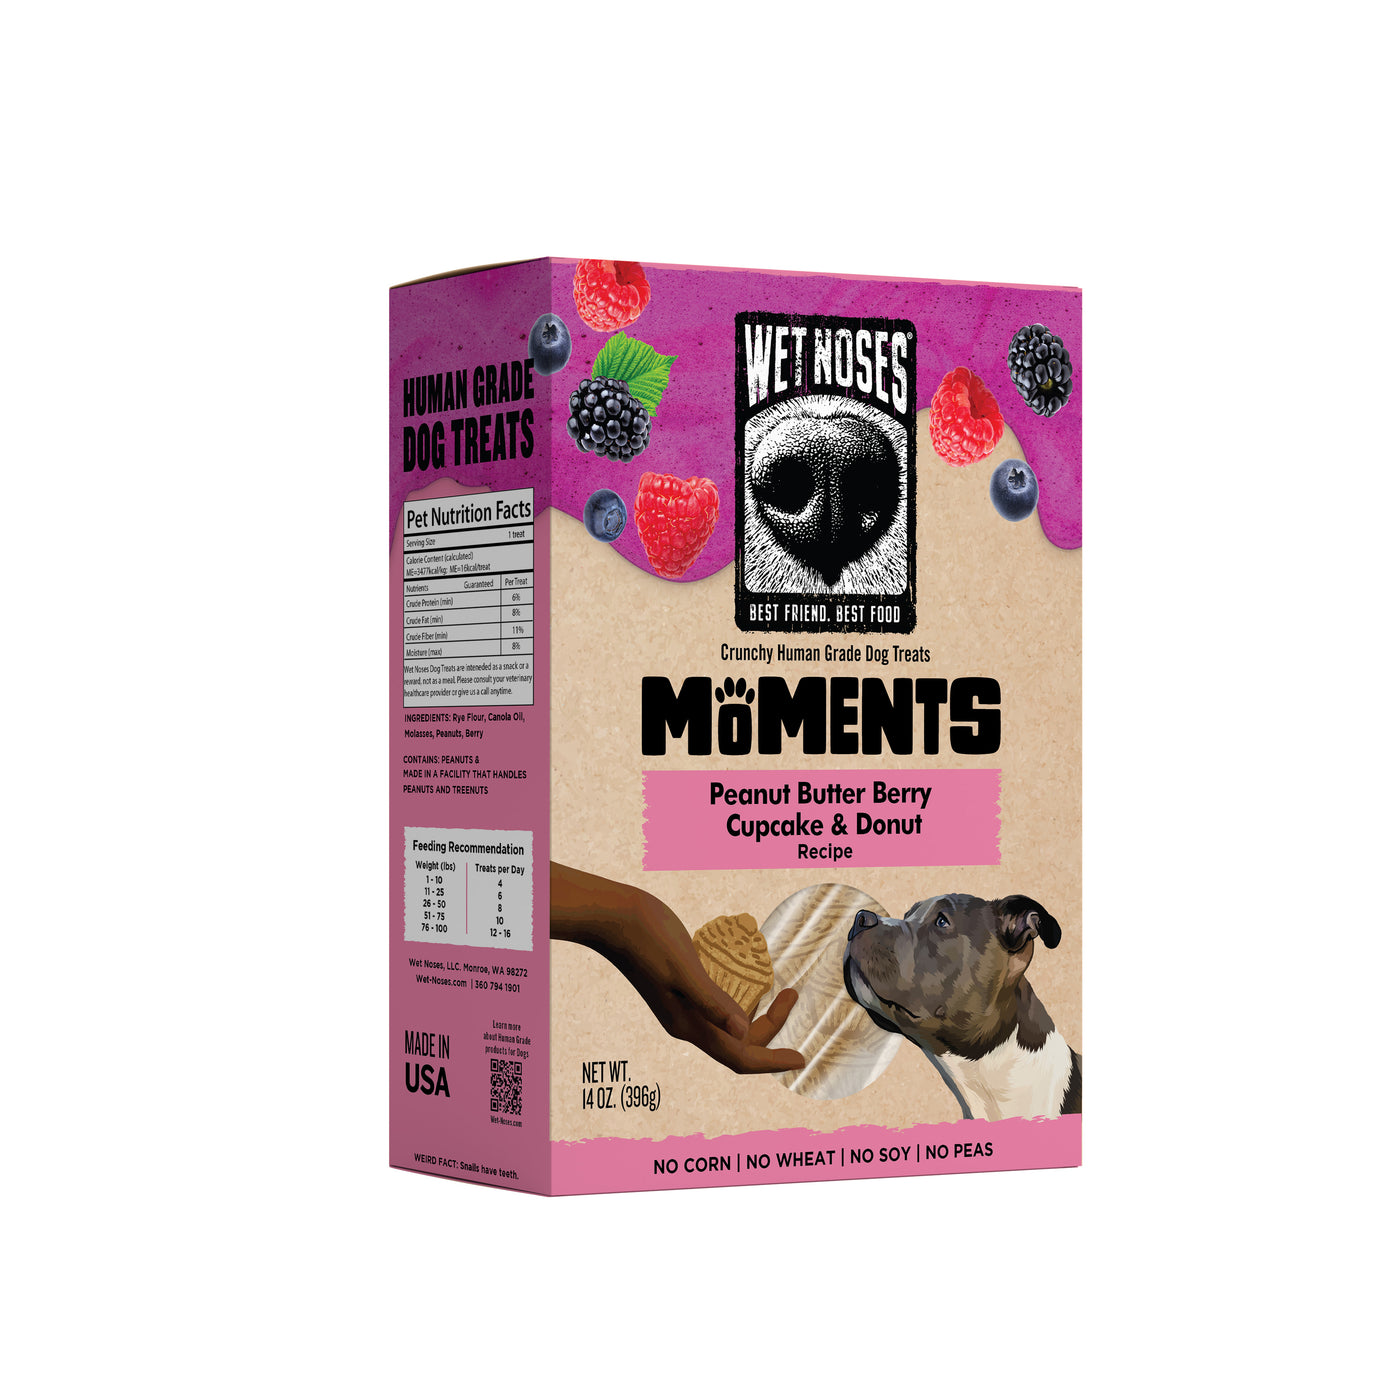 Moments Peanut Butter Berry Cupcake & Donut 14oz - Case of 6